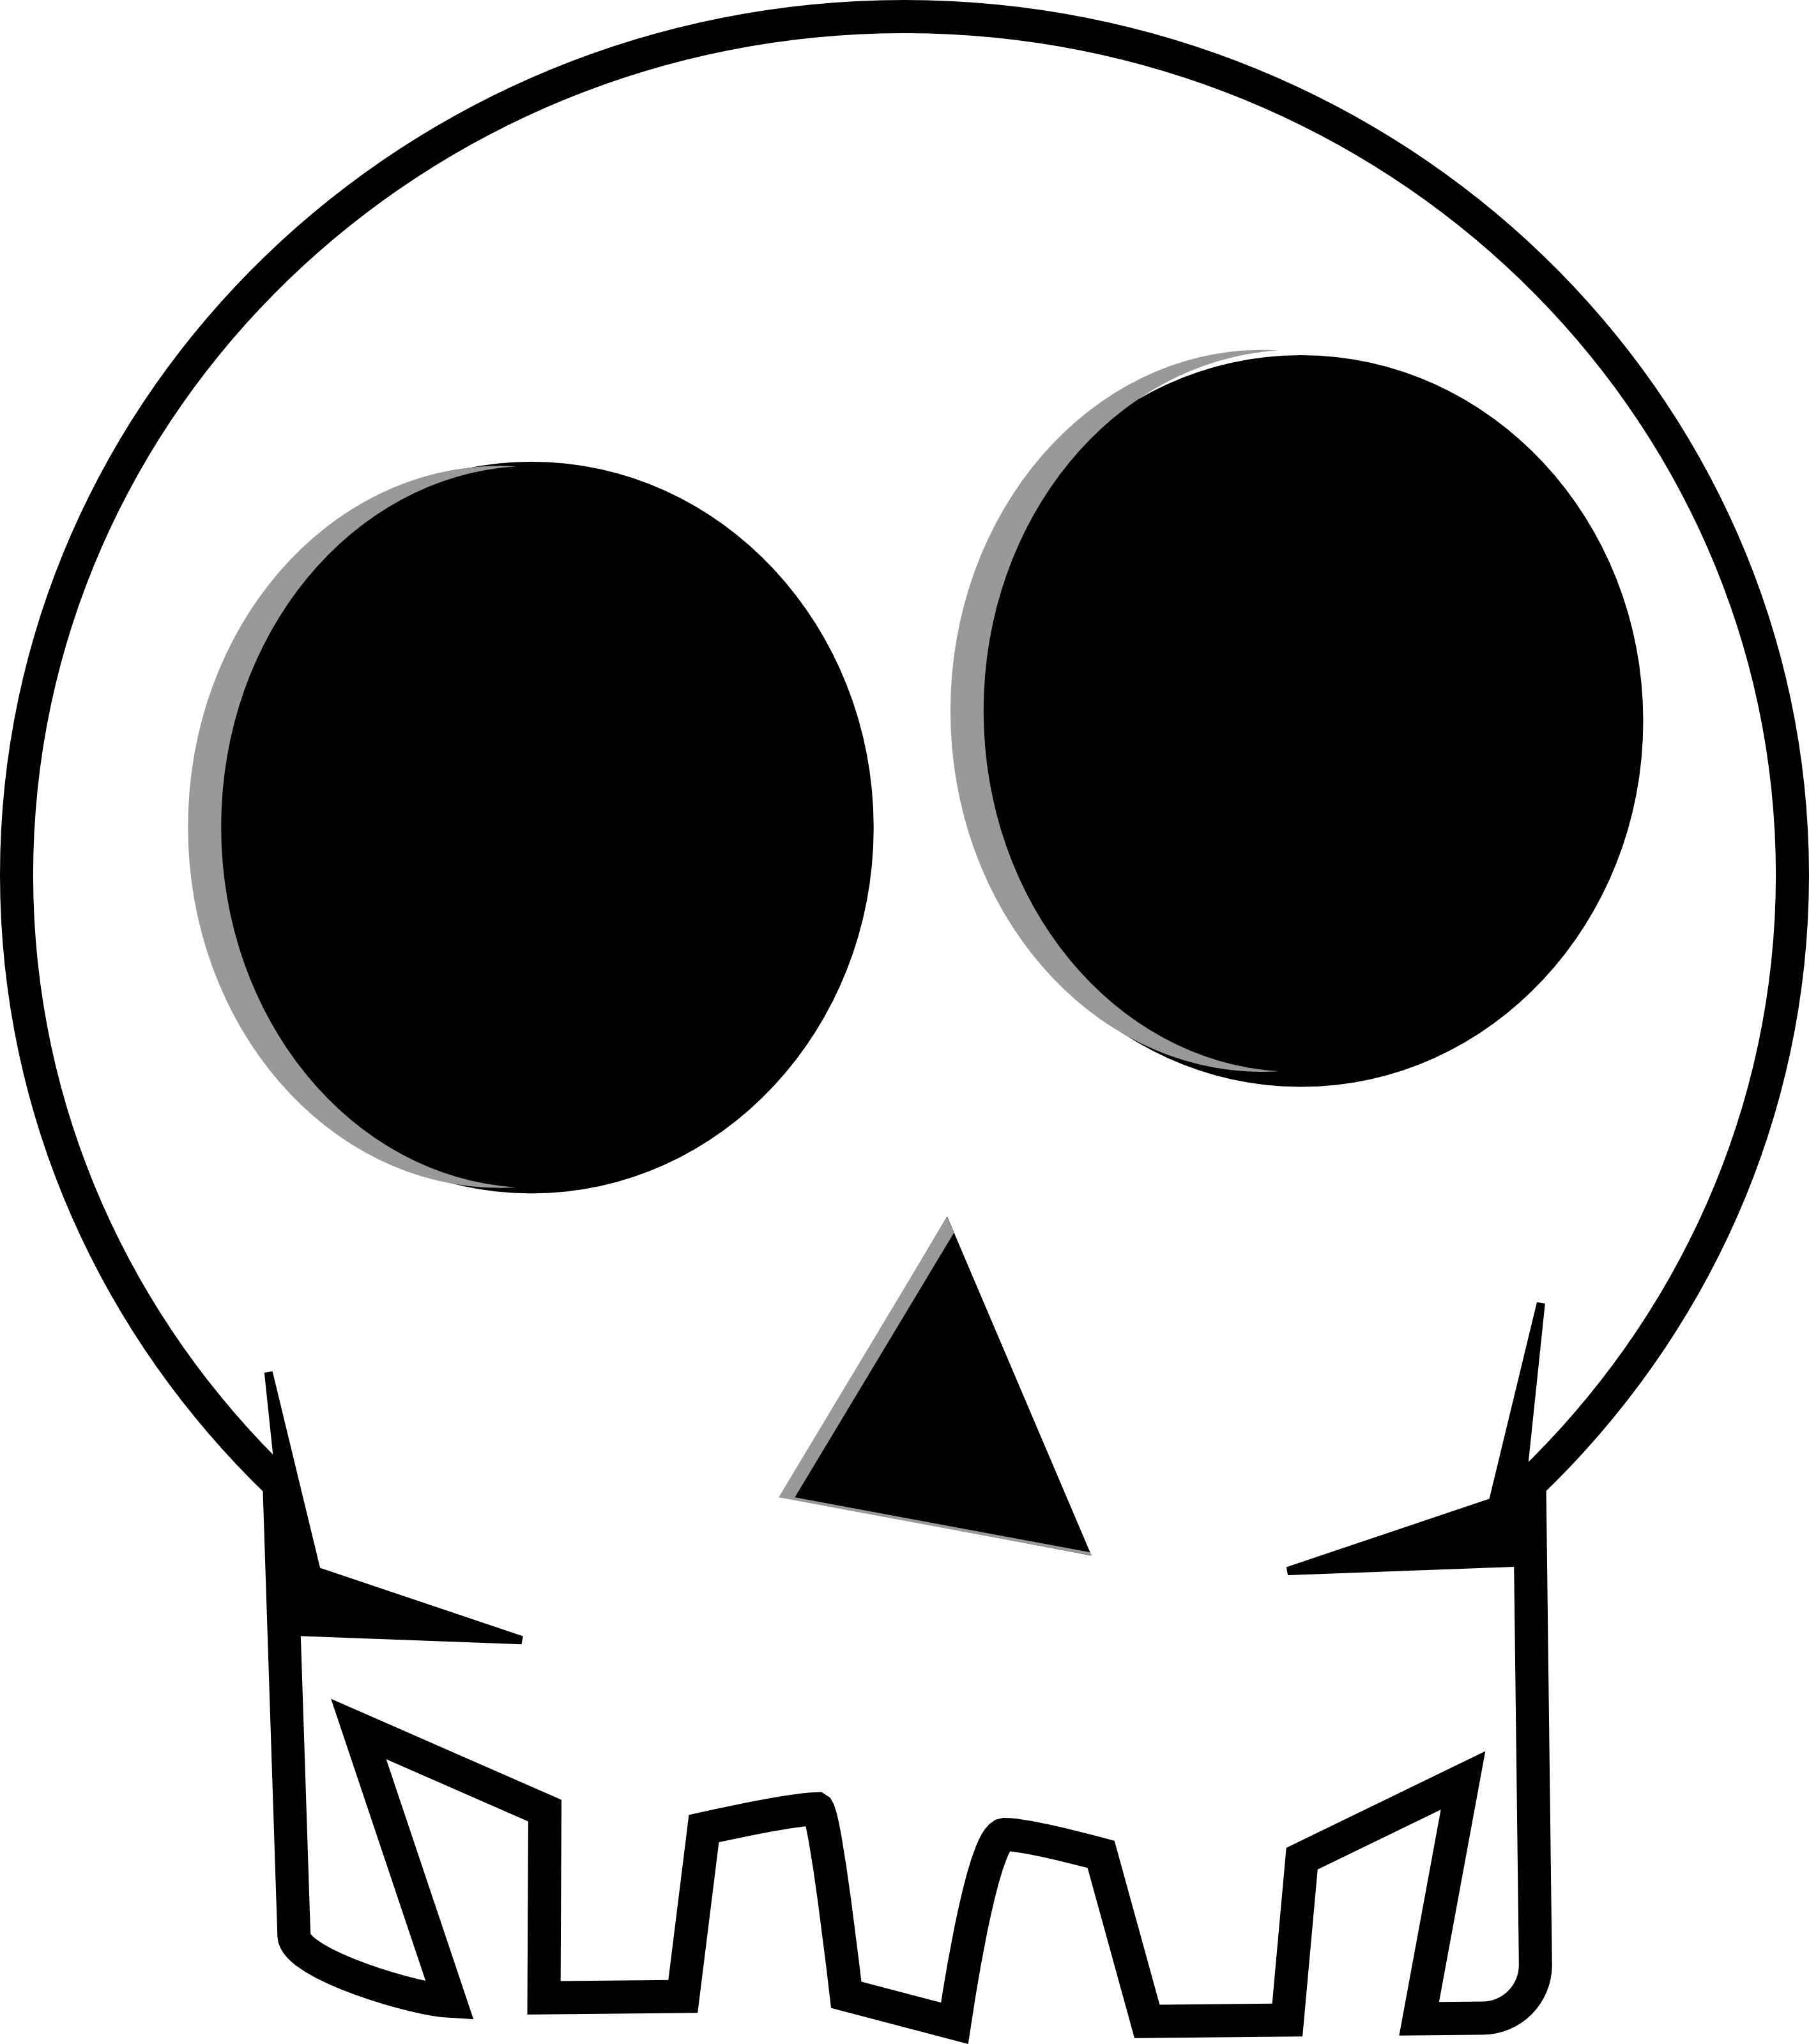 Halloween Skeleton Head Clipart | Clipart library - Free Clipart Images